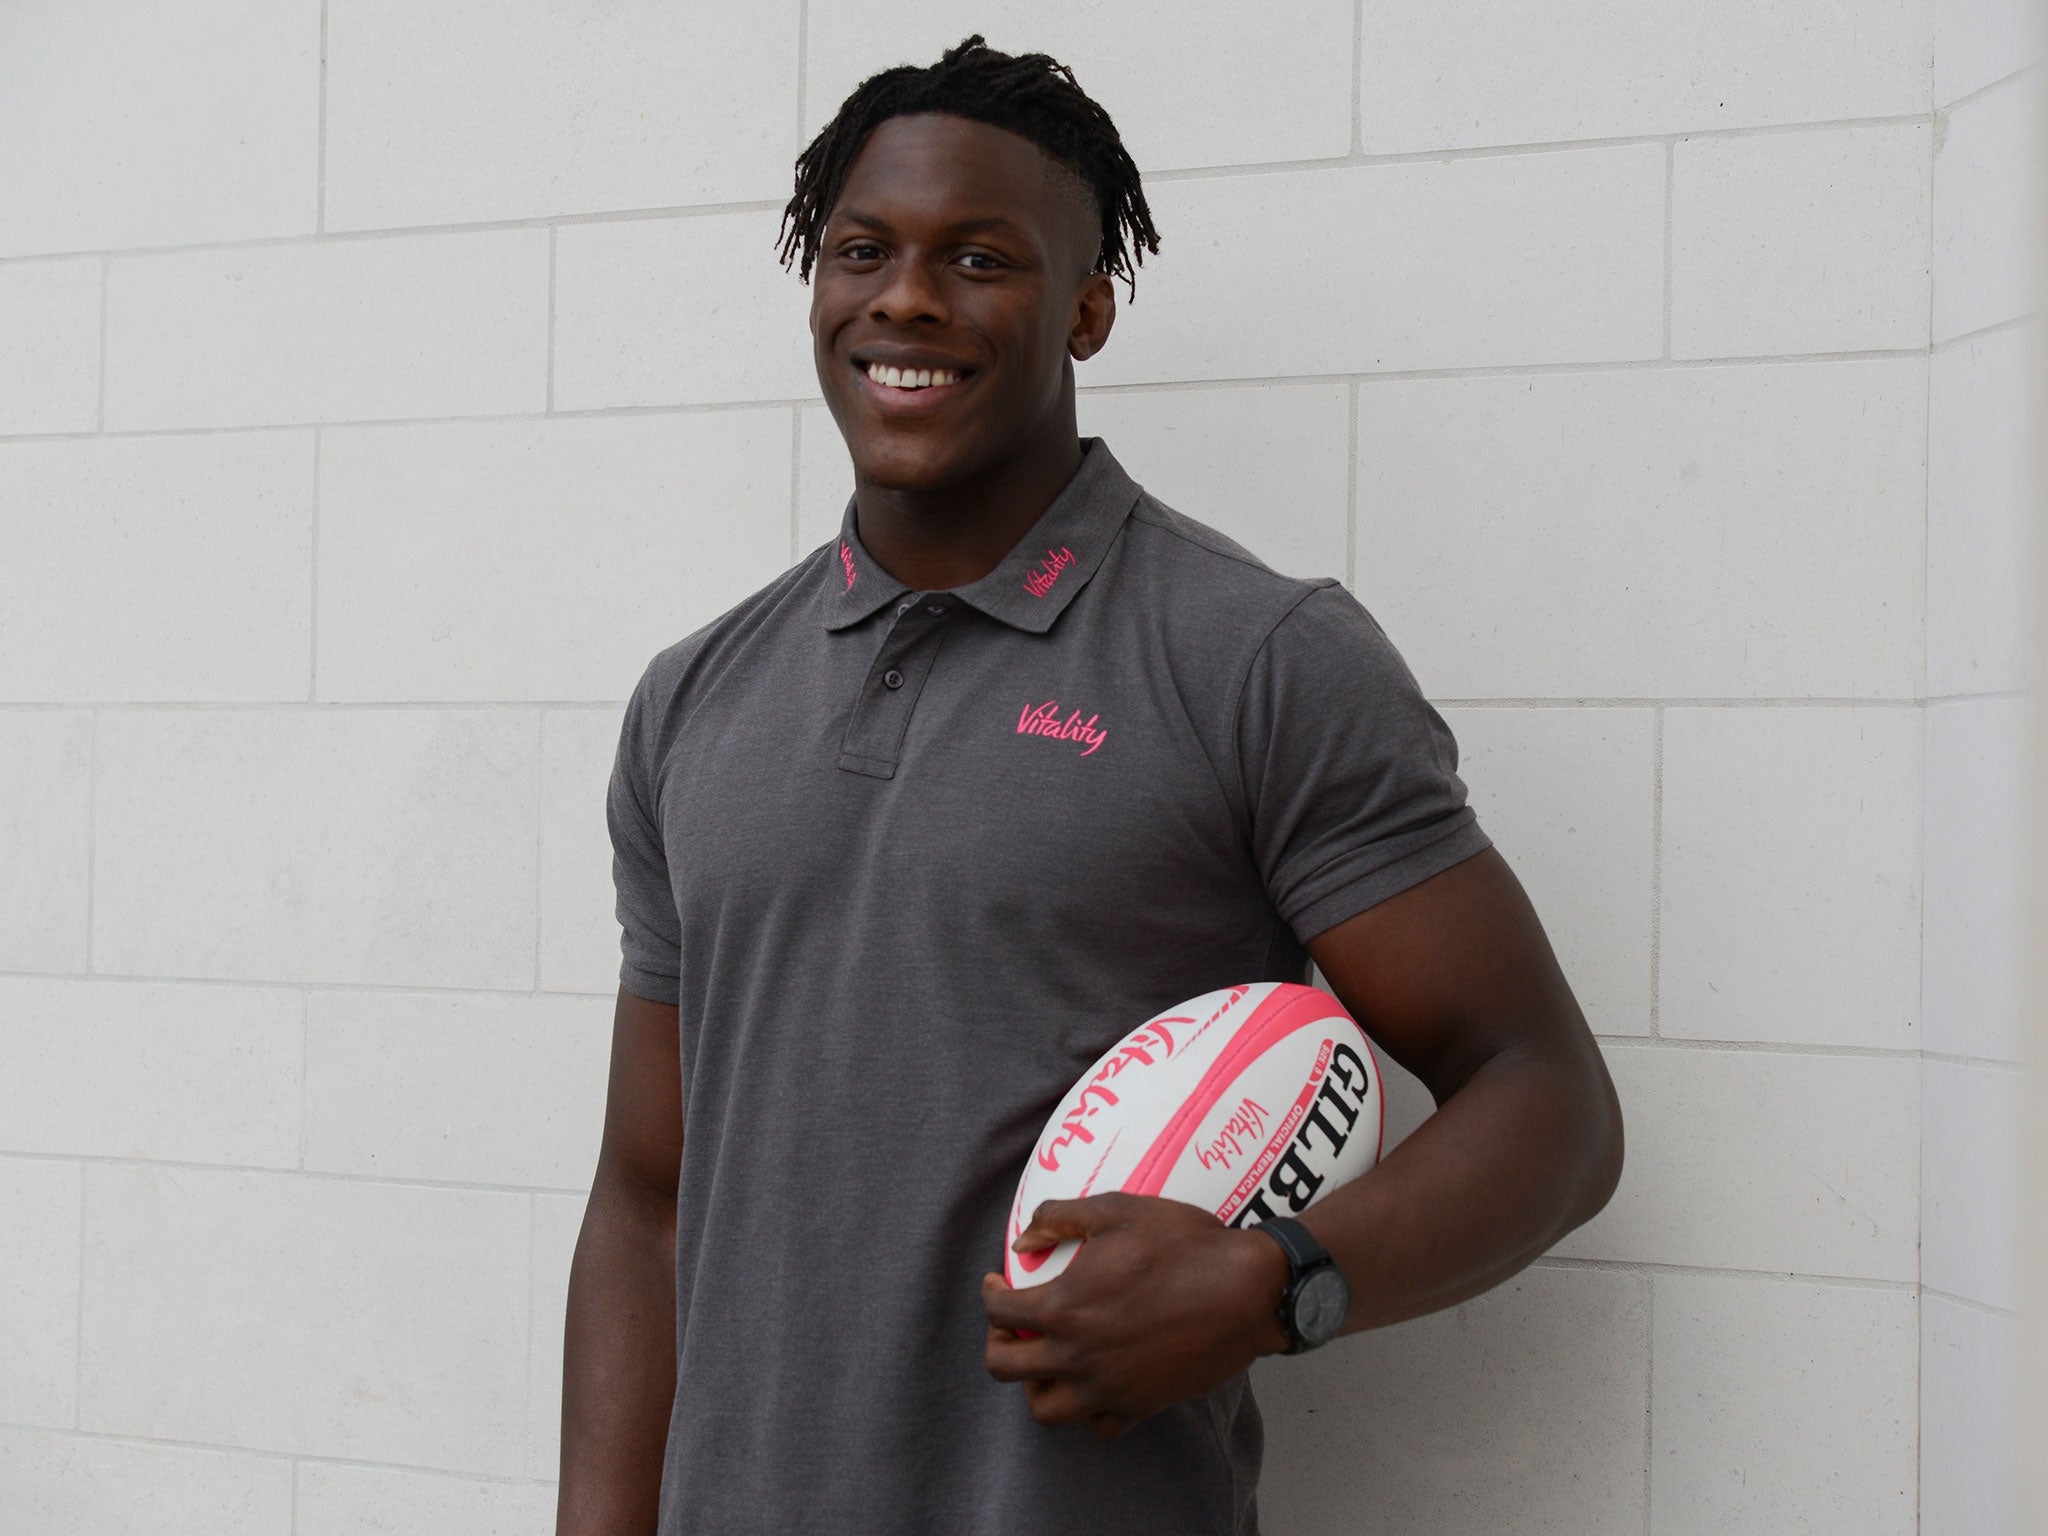 Maro Itoje may be in for a change of position